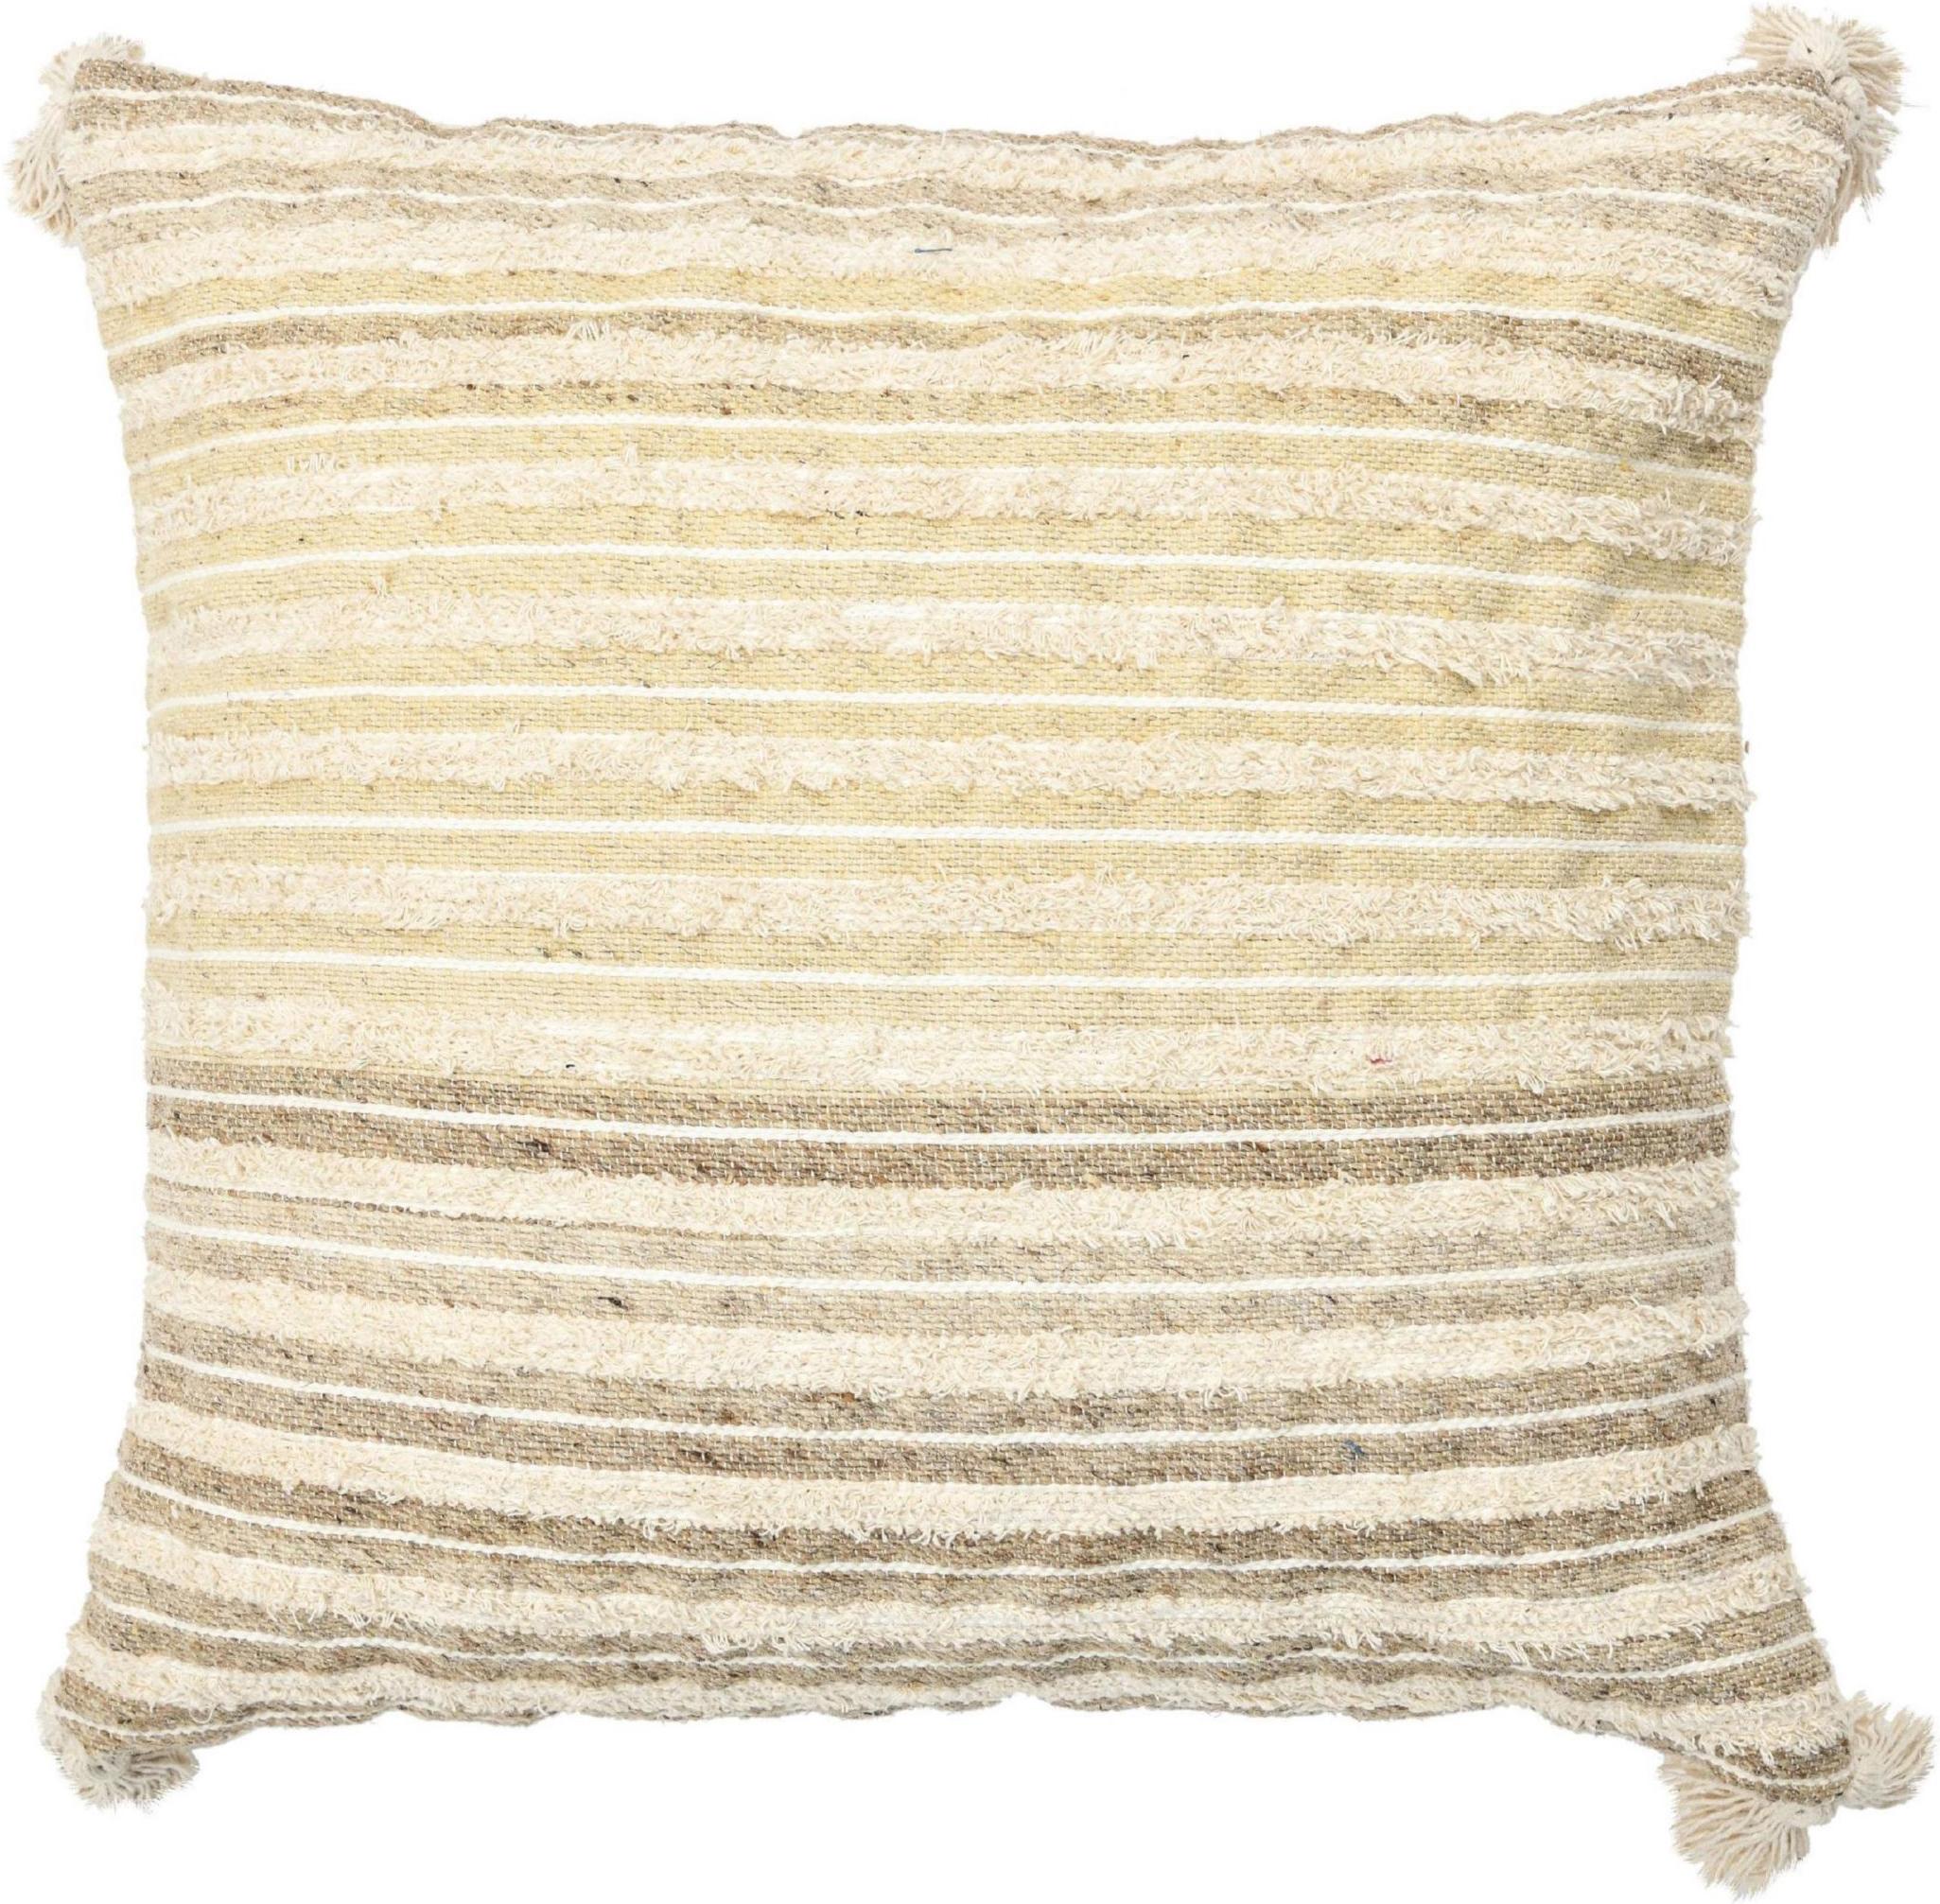 Boho Chic Style Modern Wool and Cotton Pillow In Beige In New Condition For Sale In Norwalk, CT